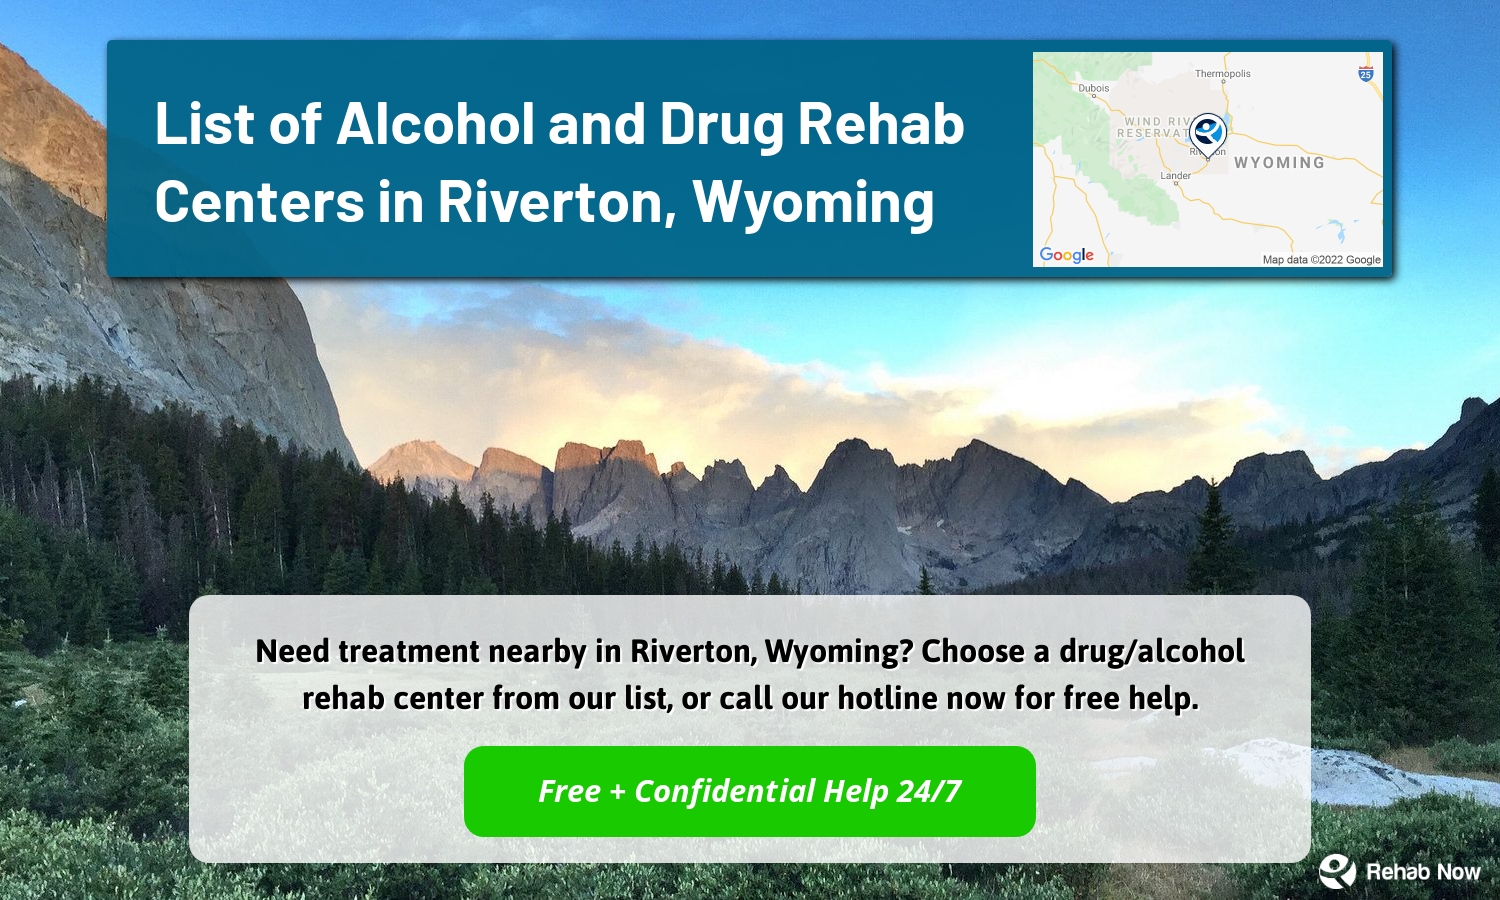 Need treatment nearby in Riverton, Wyoming? Choose a drug/alcohol rehab center from our list, or call our hotline now for free help.